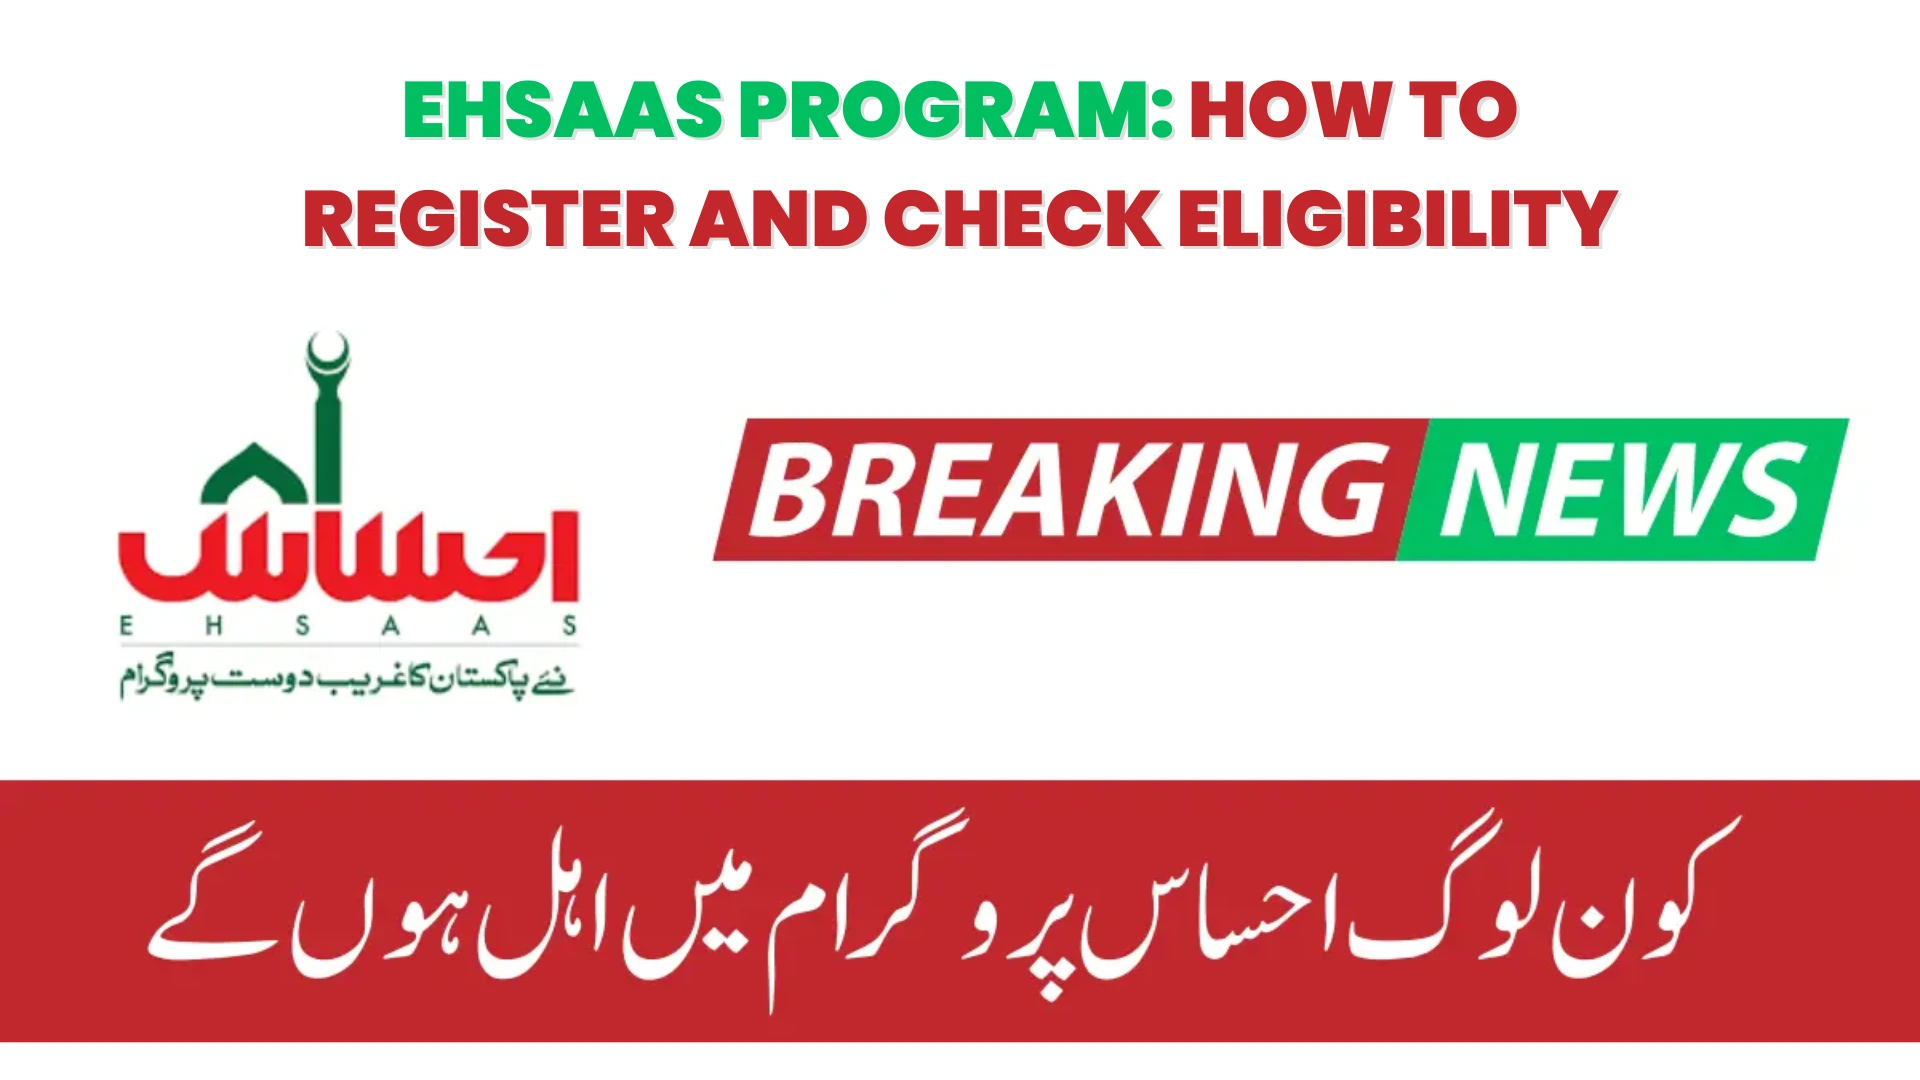 Ehsaas Program_ How to Register and Check Eligibility